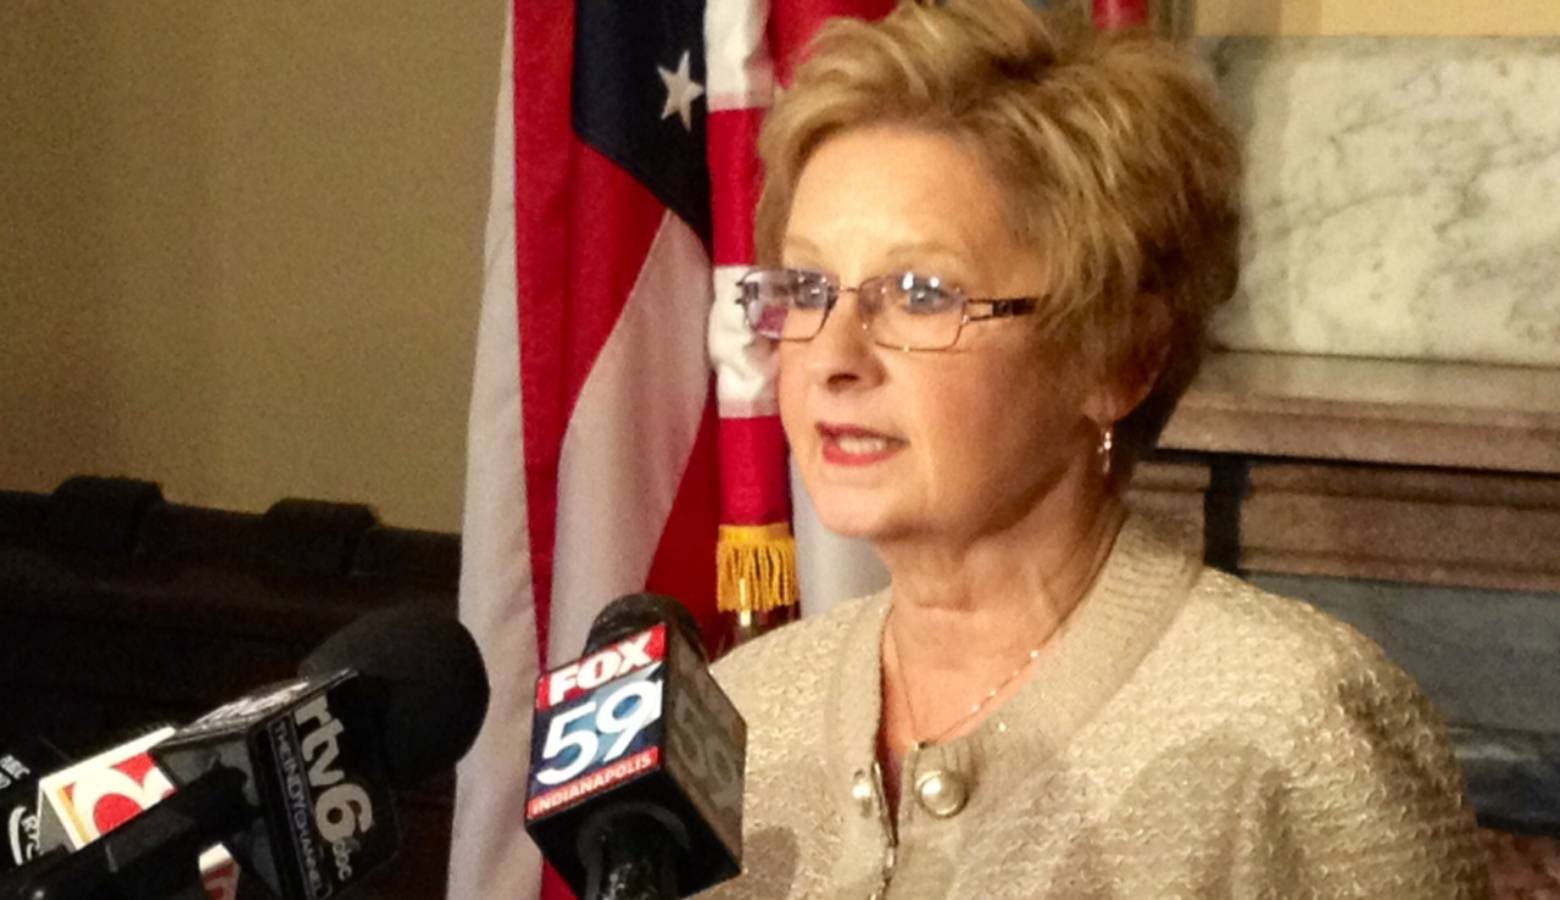 The Indiana Election Commission denied a challenge to Secretary of State Connie Lawson’s eligibility in the upcoming election. (Brandon Smith/IPB News)